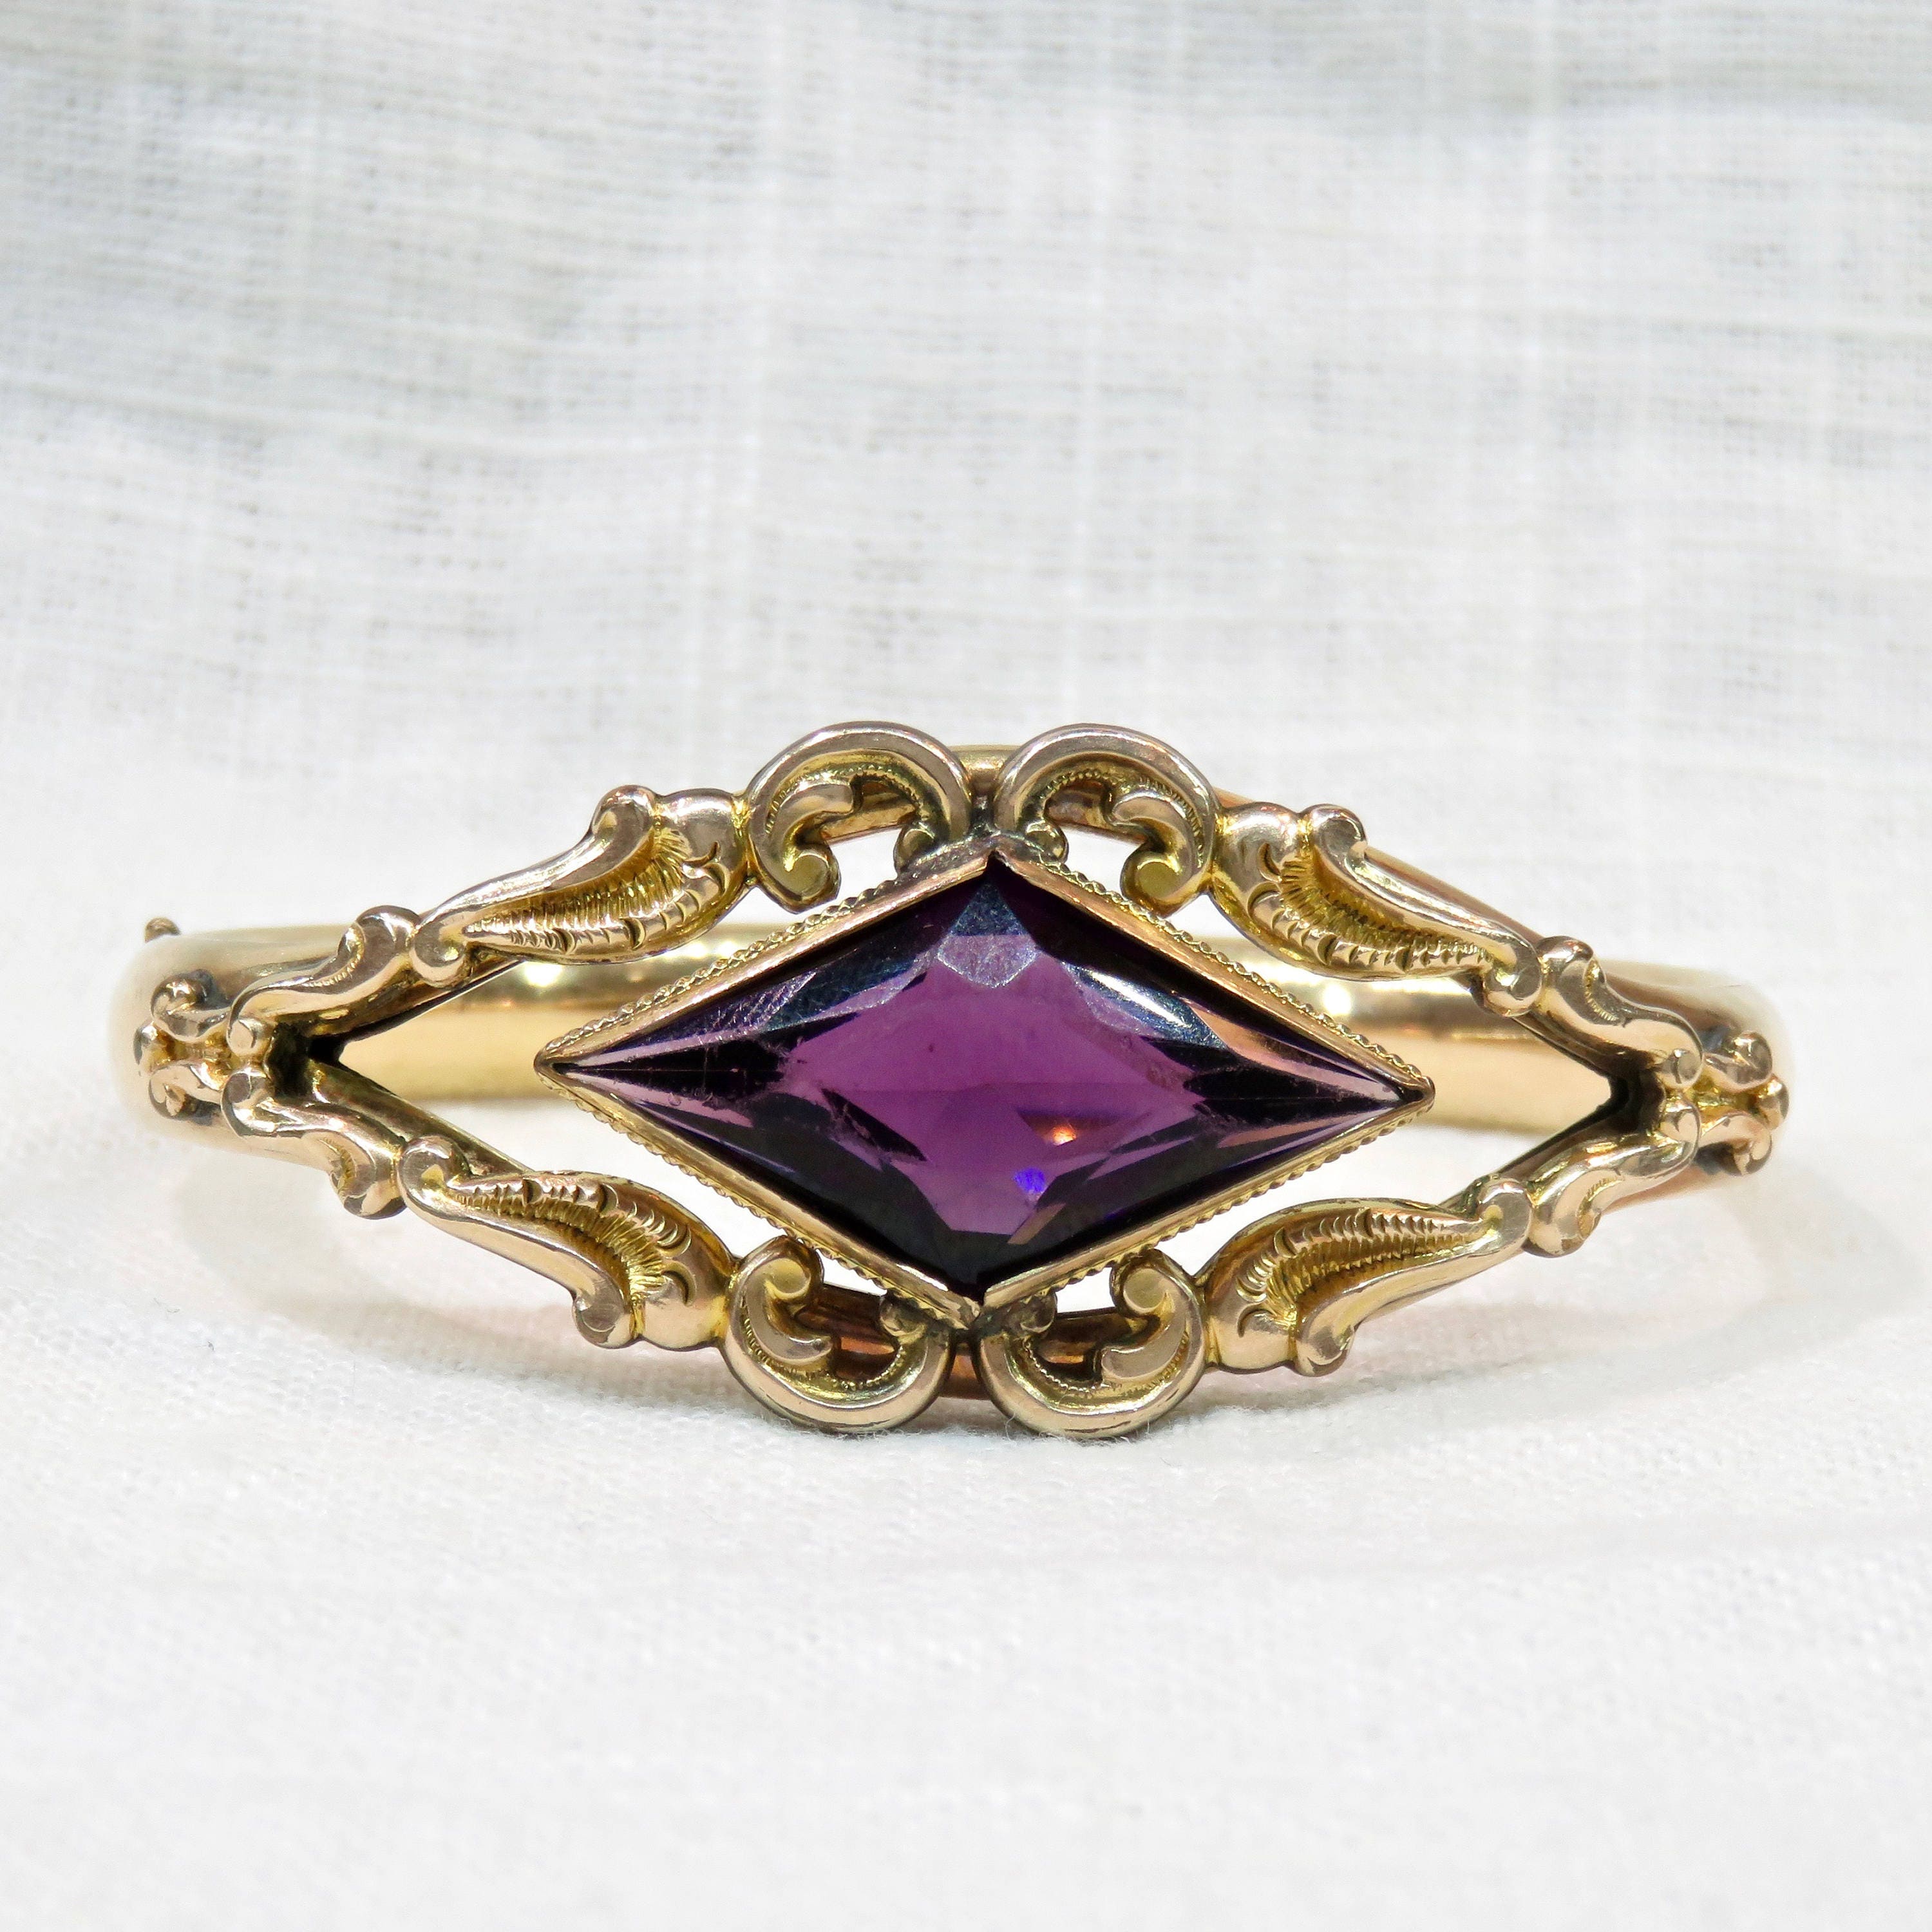 Victorian Bracelet in Gold Fill with Amethyst Crystal Vintage